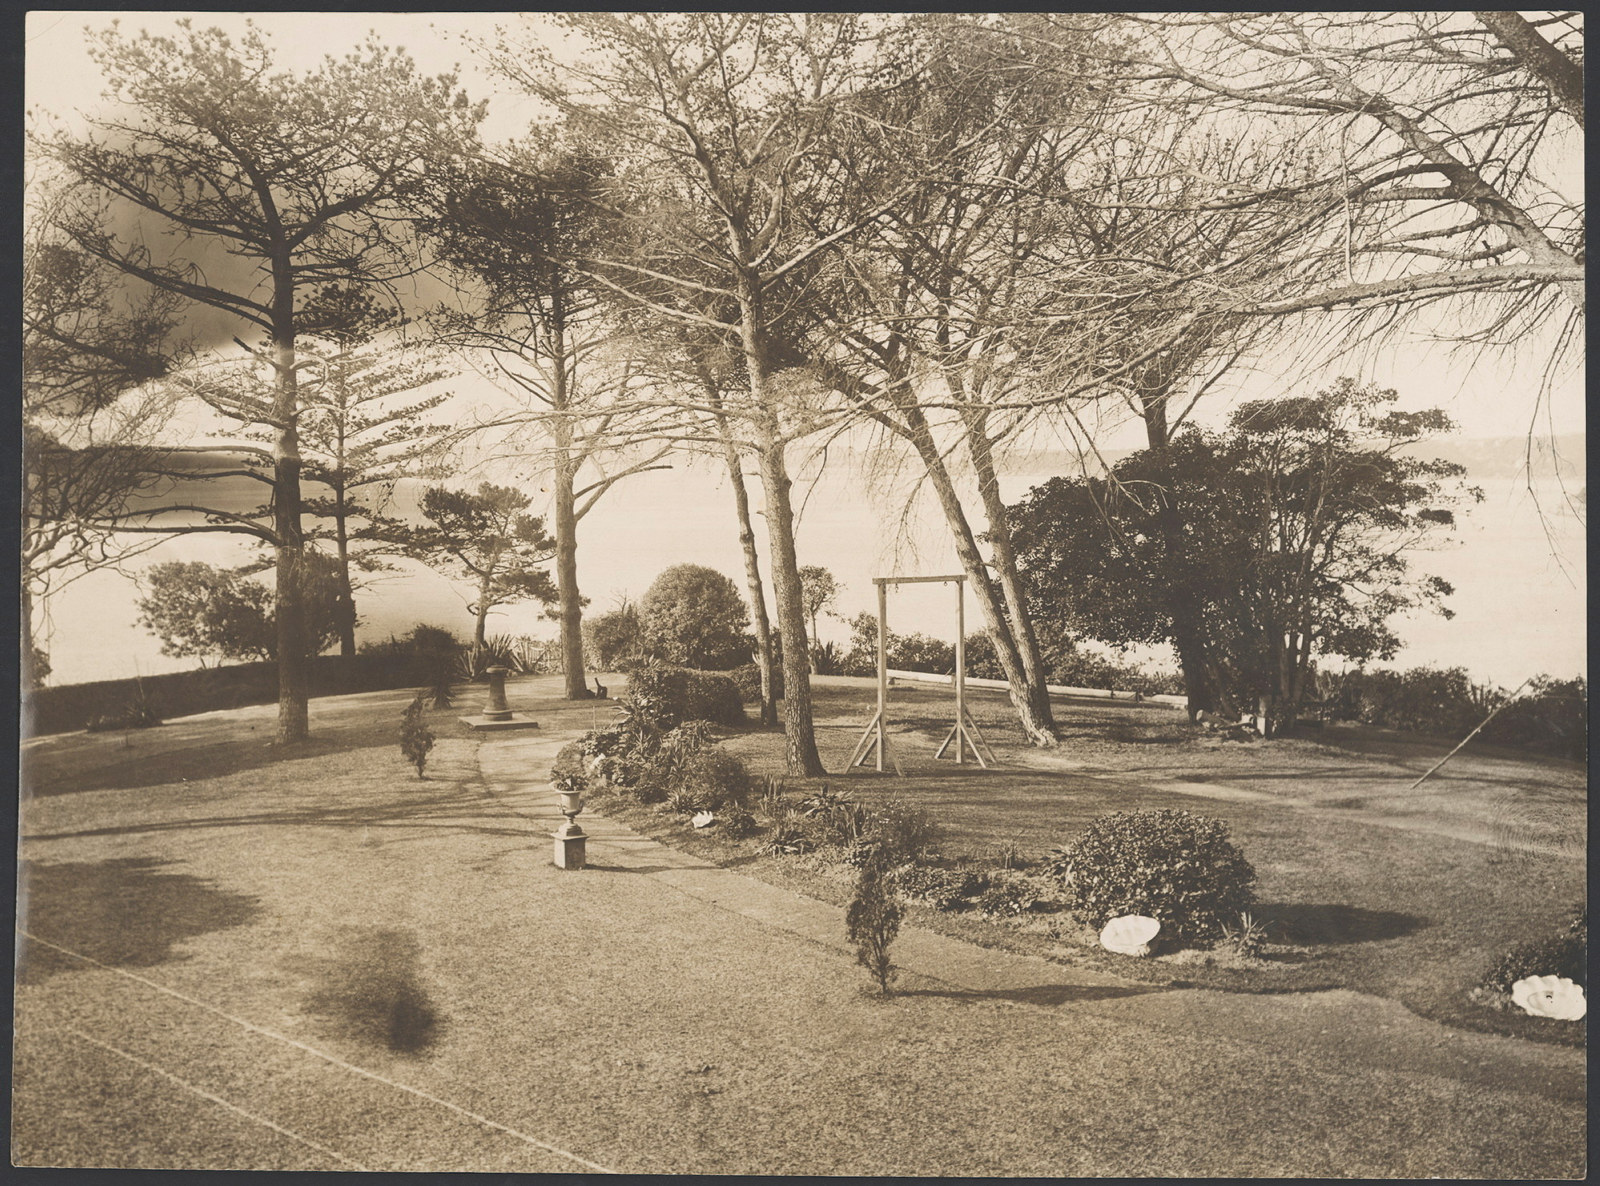 The grounds at Lindesay, Darling Point, 1914